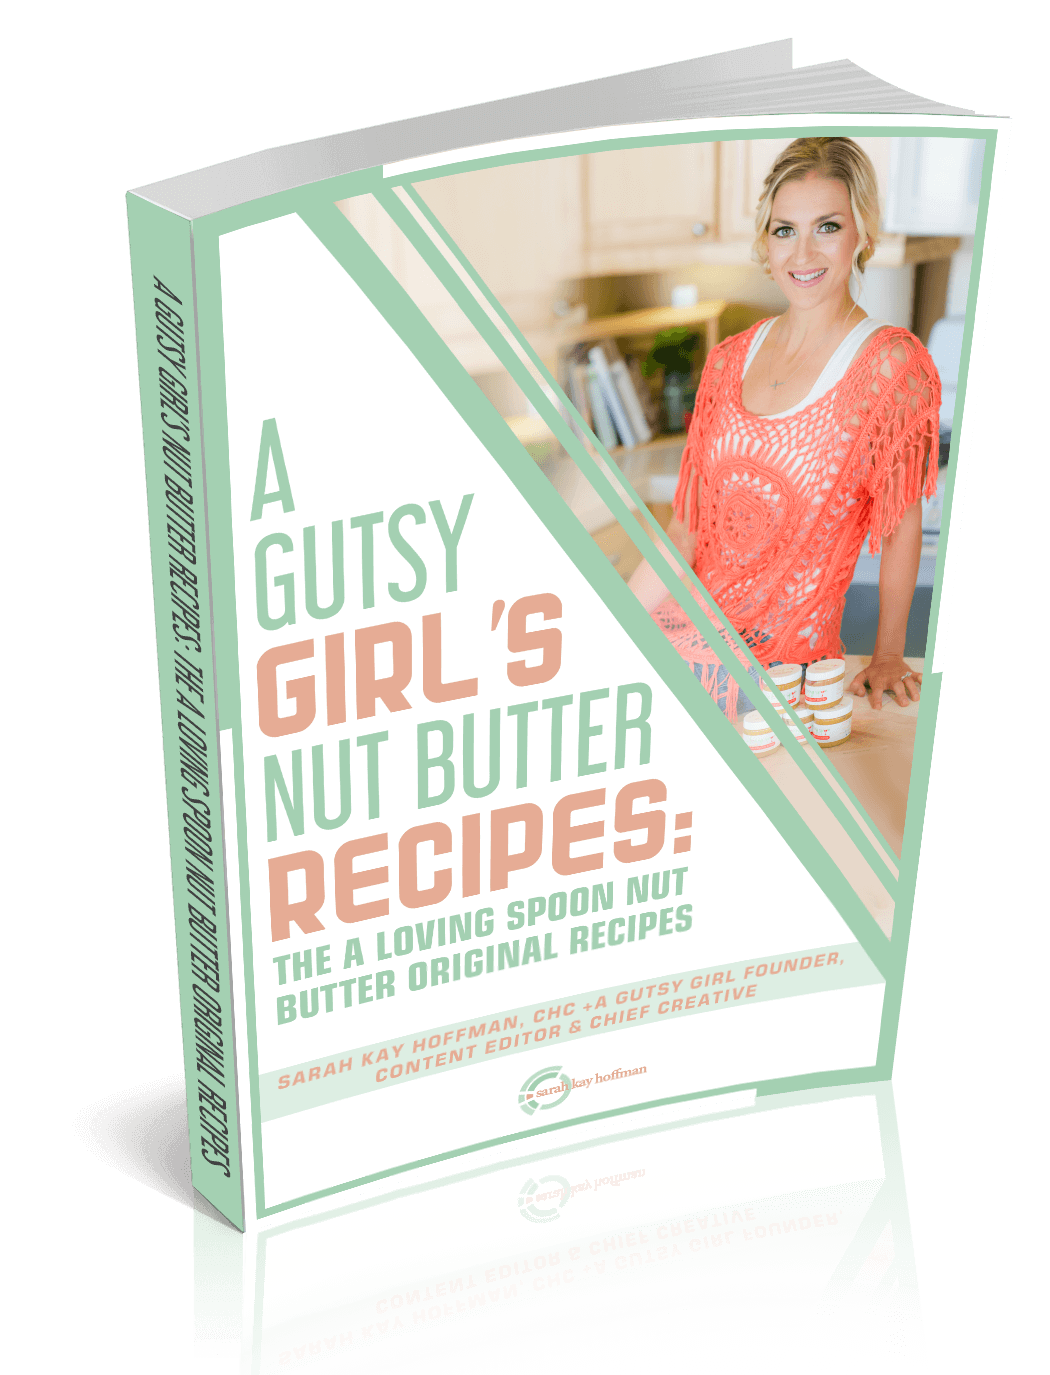 A Gutsy Girl’s Nut Butter Recipes The A Loving Spoon nut butter original recipes Cover sarahkayhoffman.com